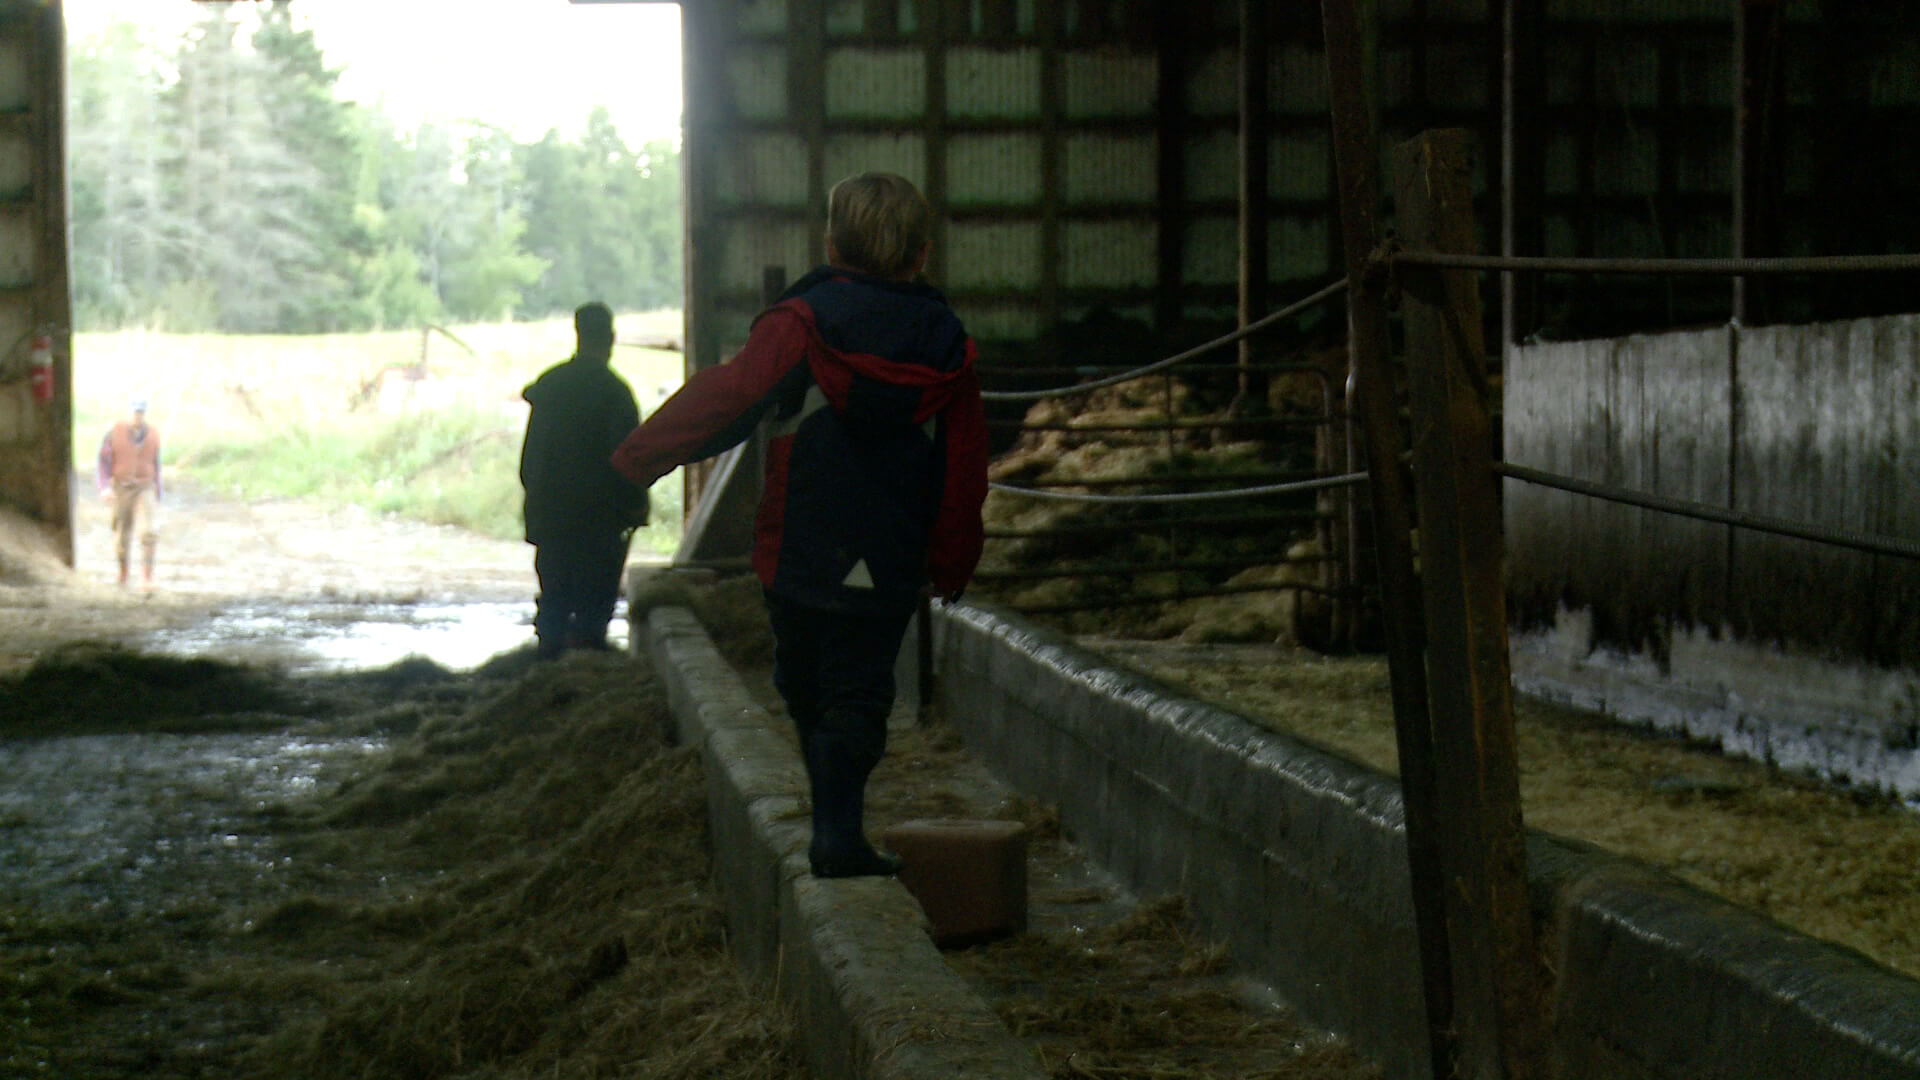 Still from Betting the Farm. A young child walks inside of a barn.